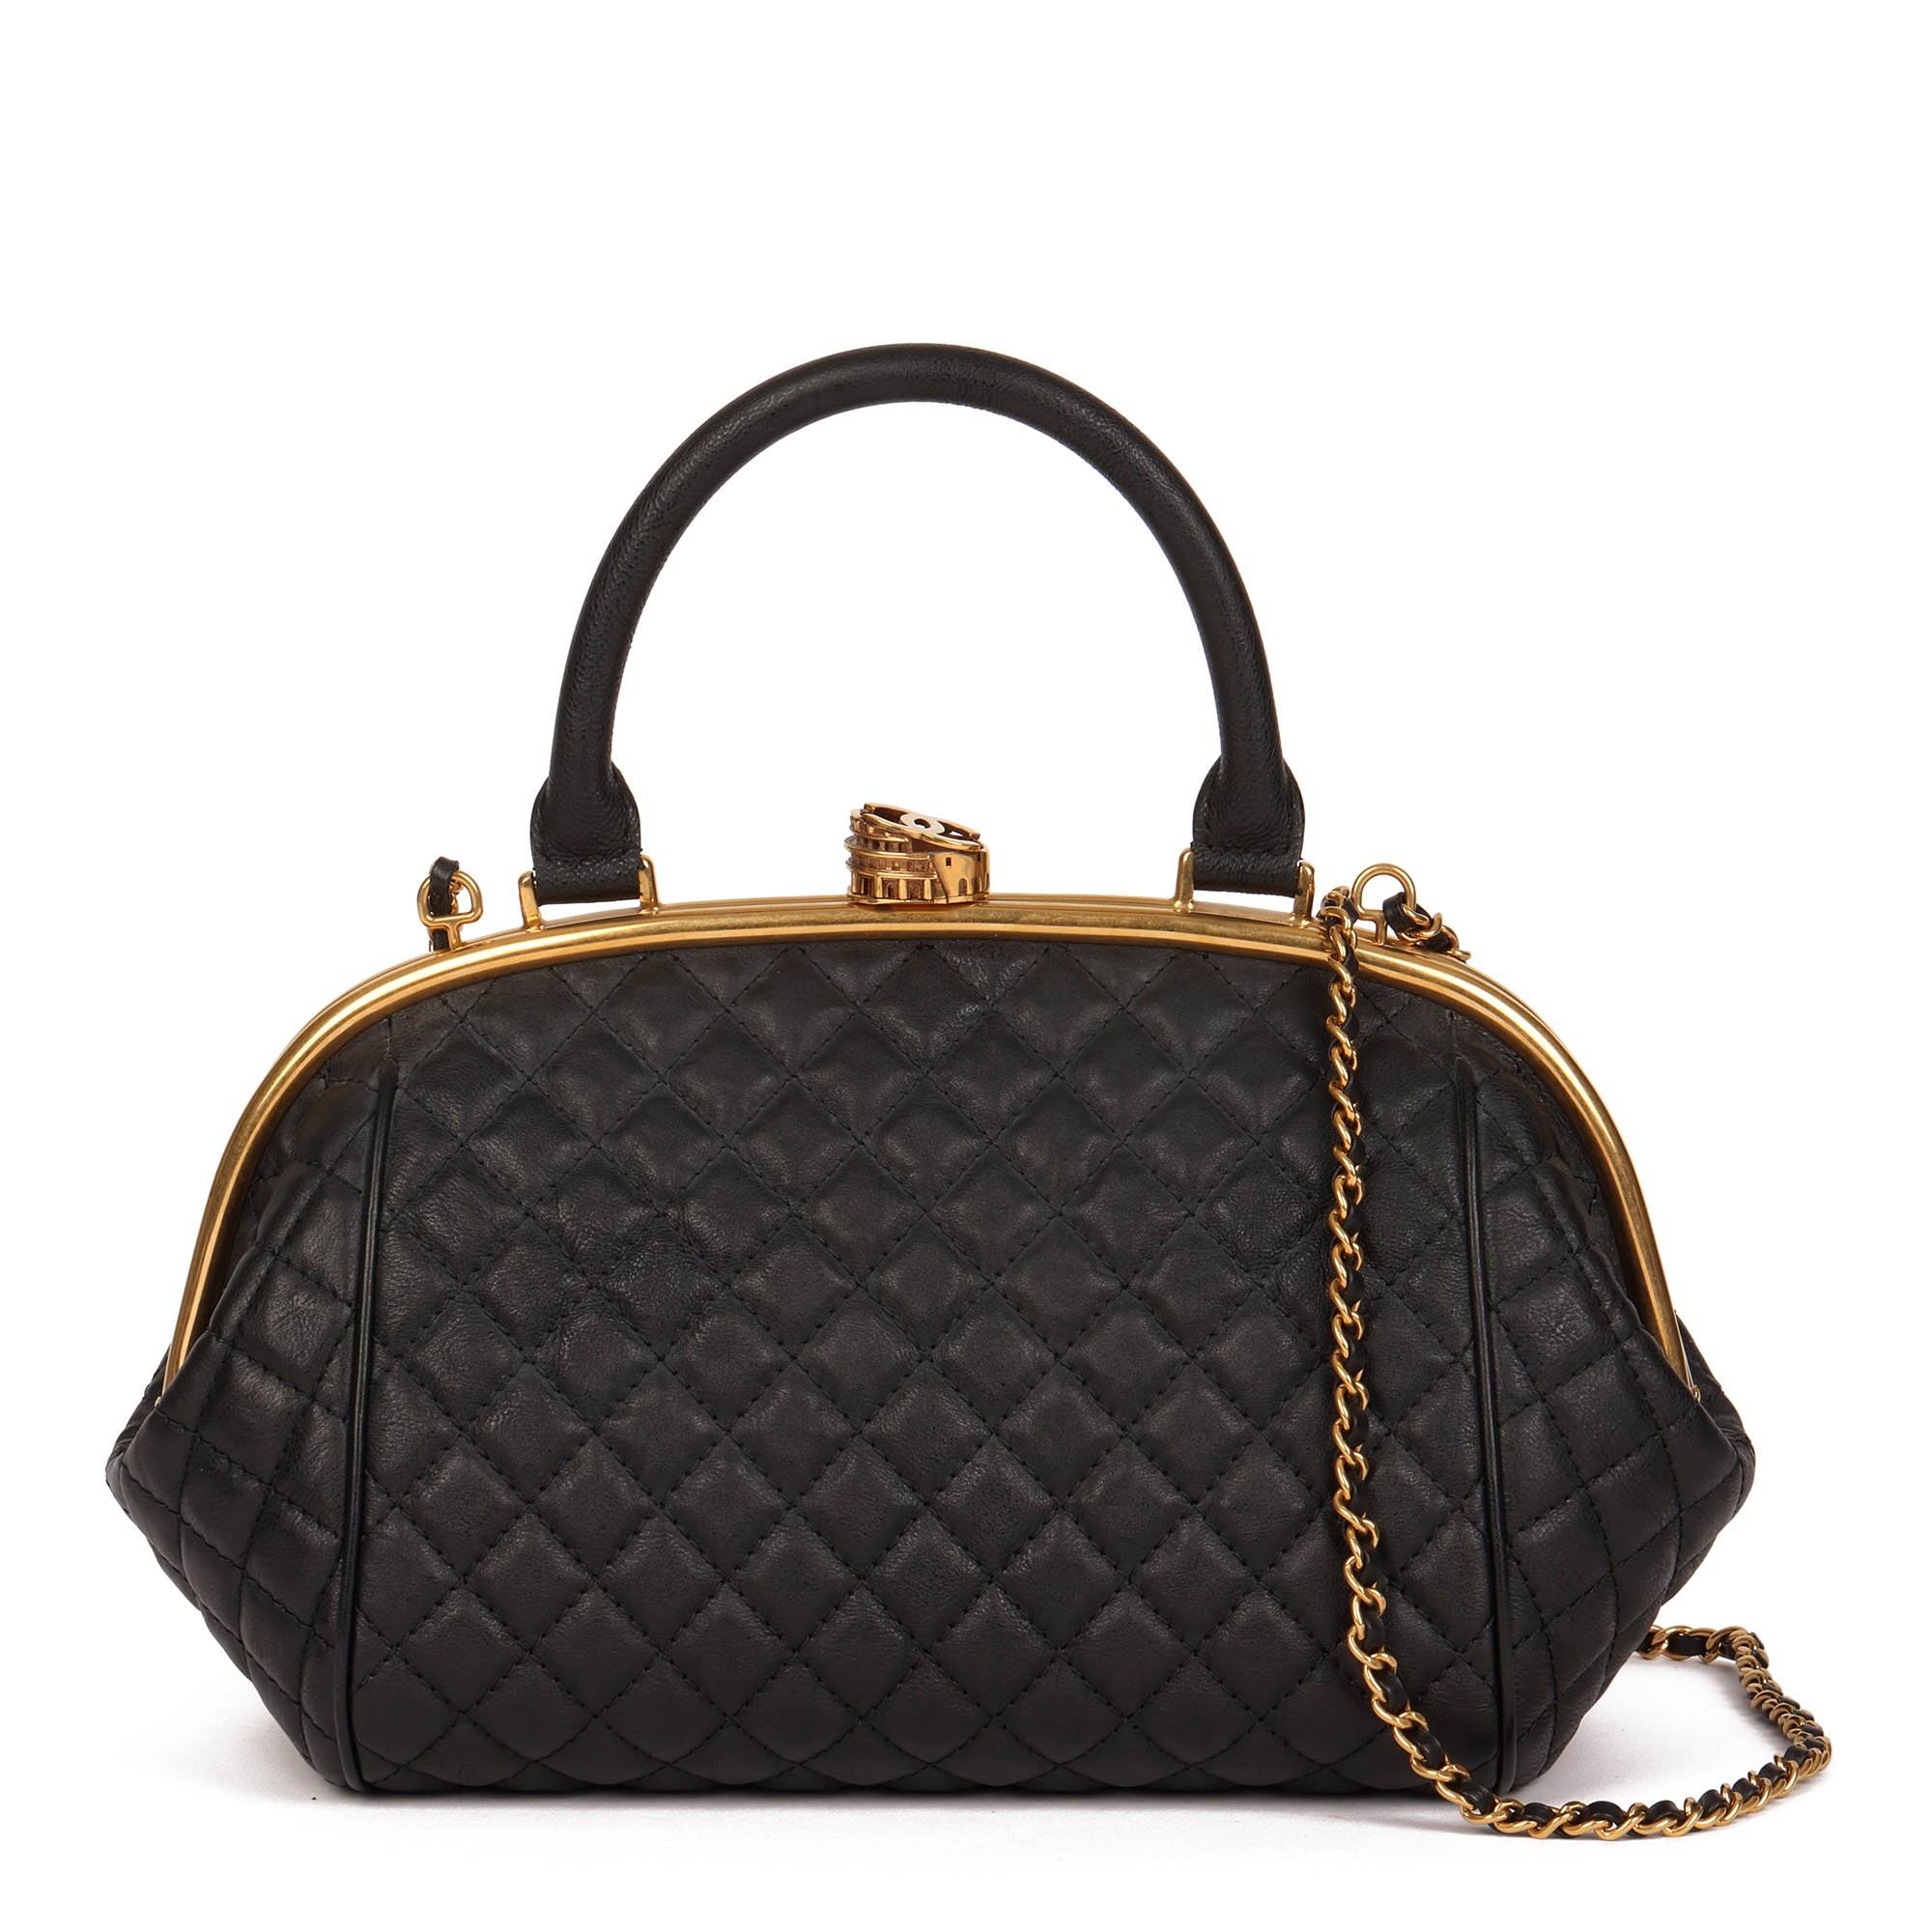 Chanel Black Quilted Calfskin Leather Paris in Rome Colosseum Kiss Lock Bowling Bag